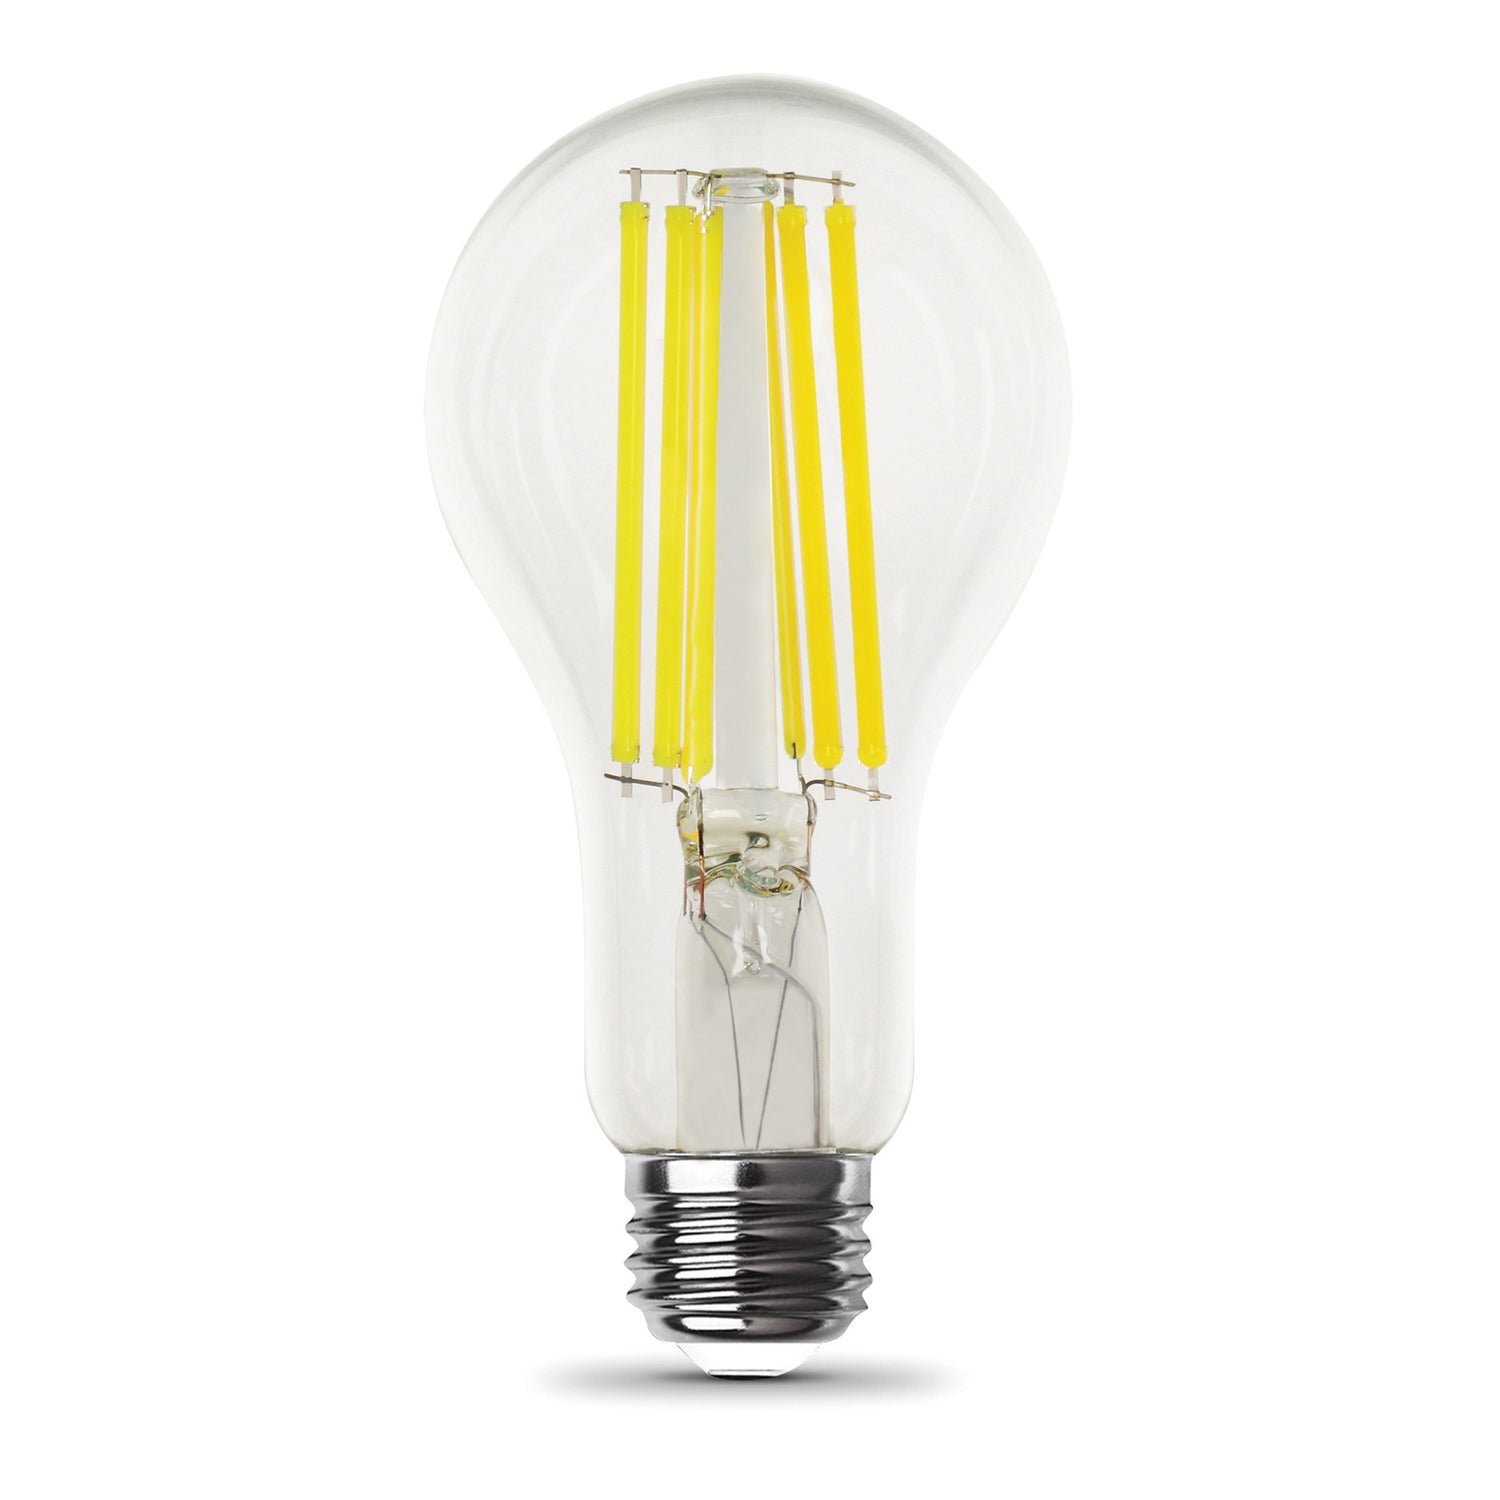 18W (150W Replacement) Bright White (3000K) A21 E26 Base Dimmable Bright Light Output LED Filament Light Bulb